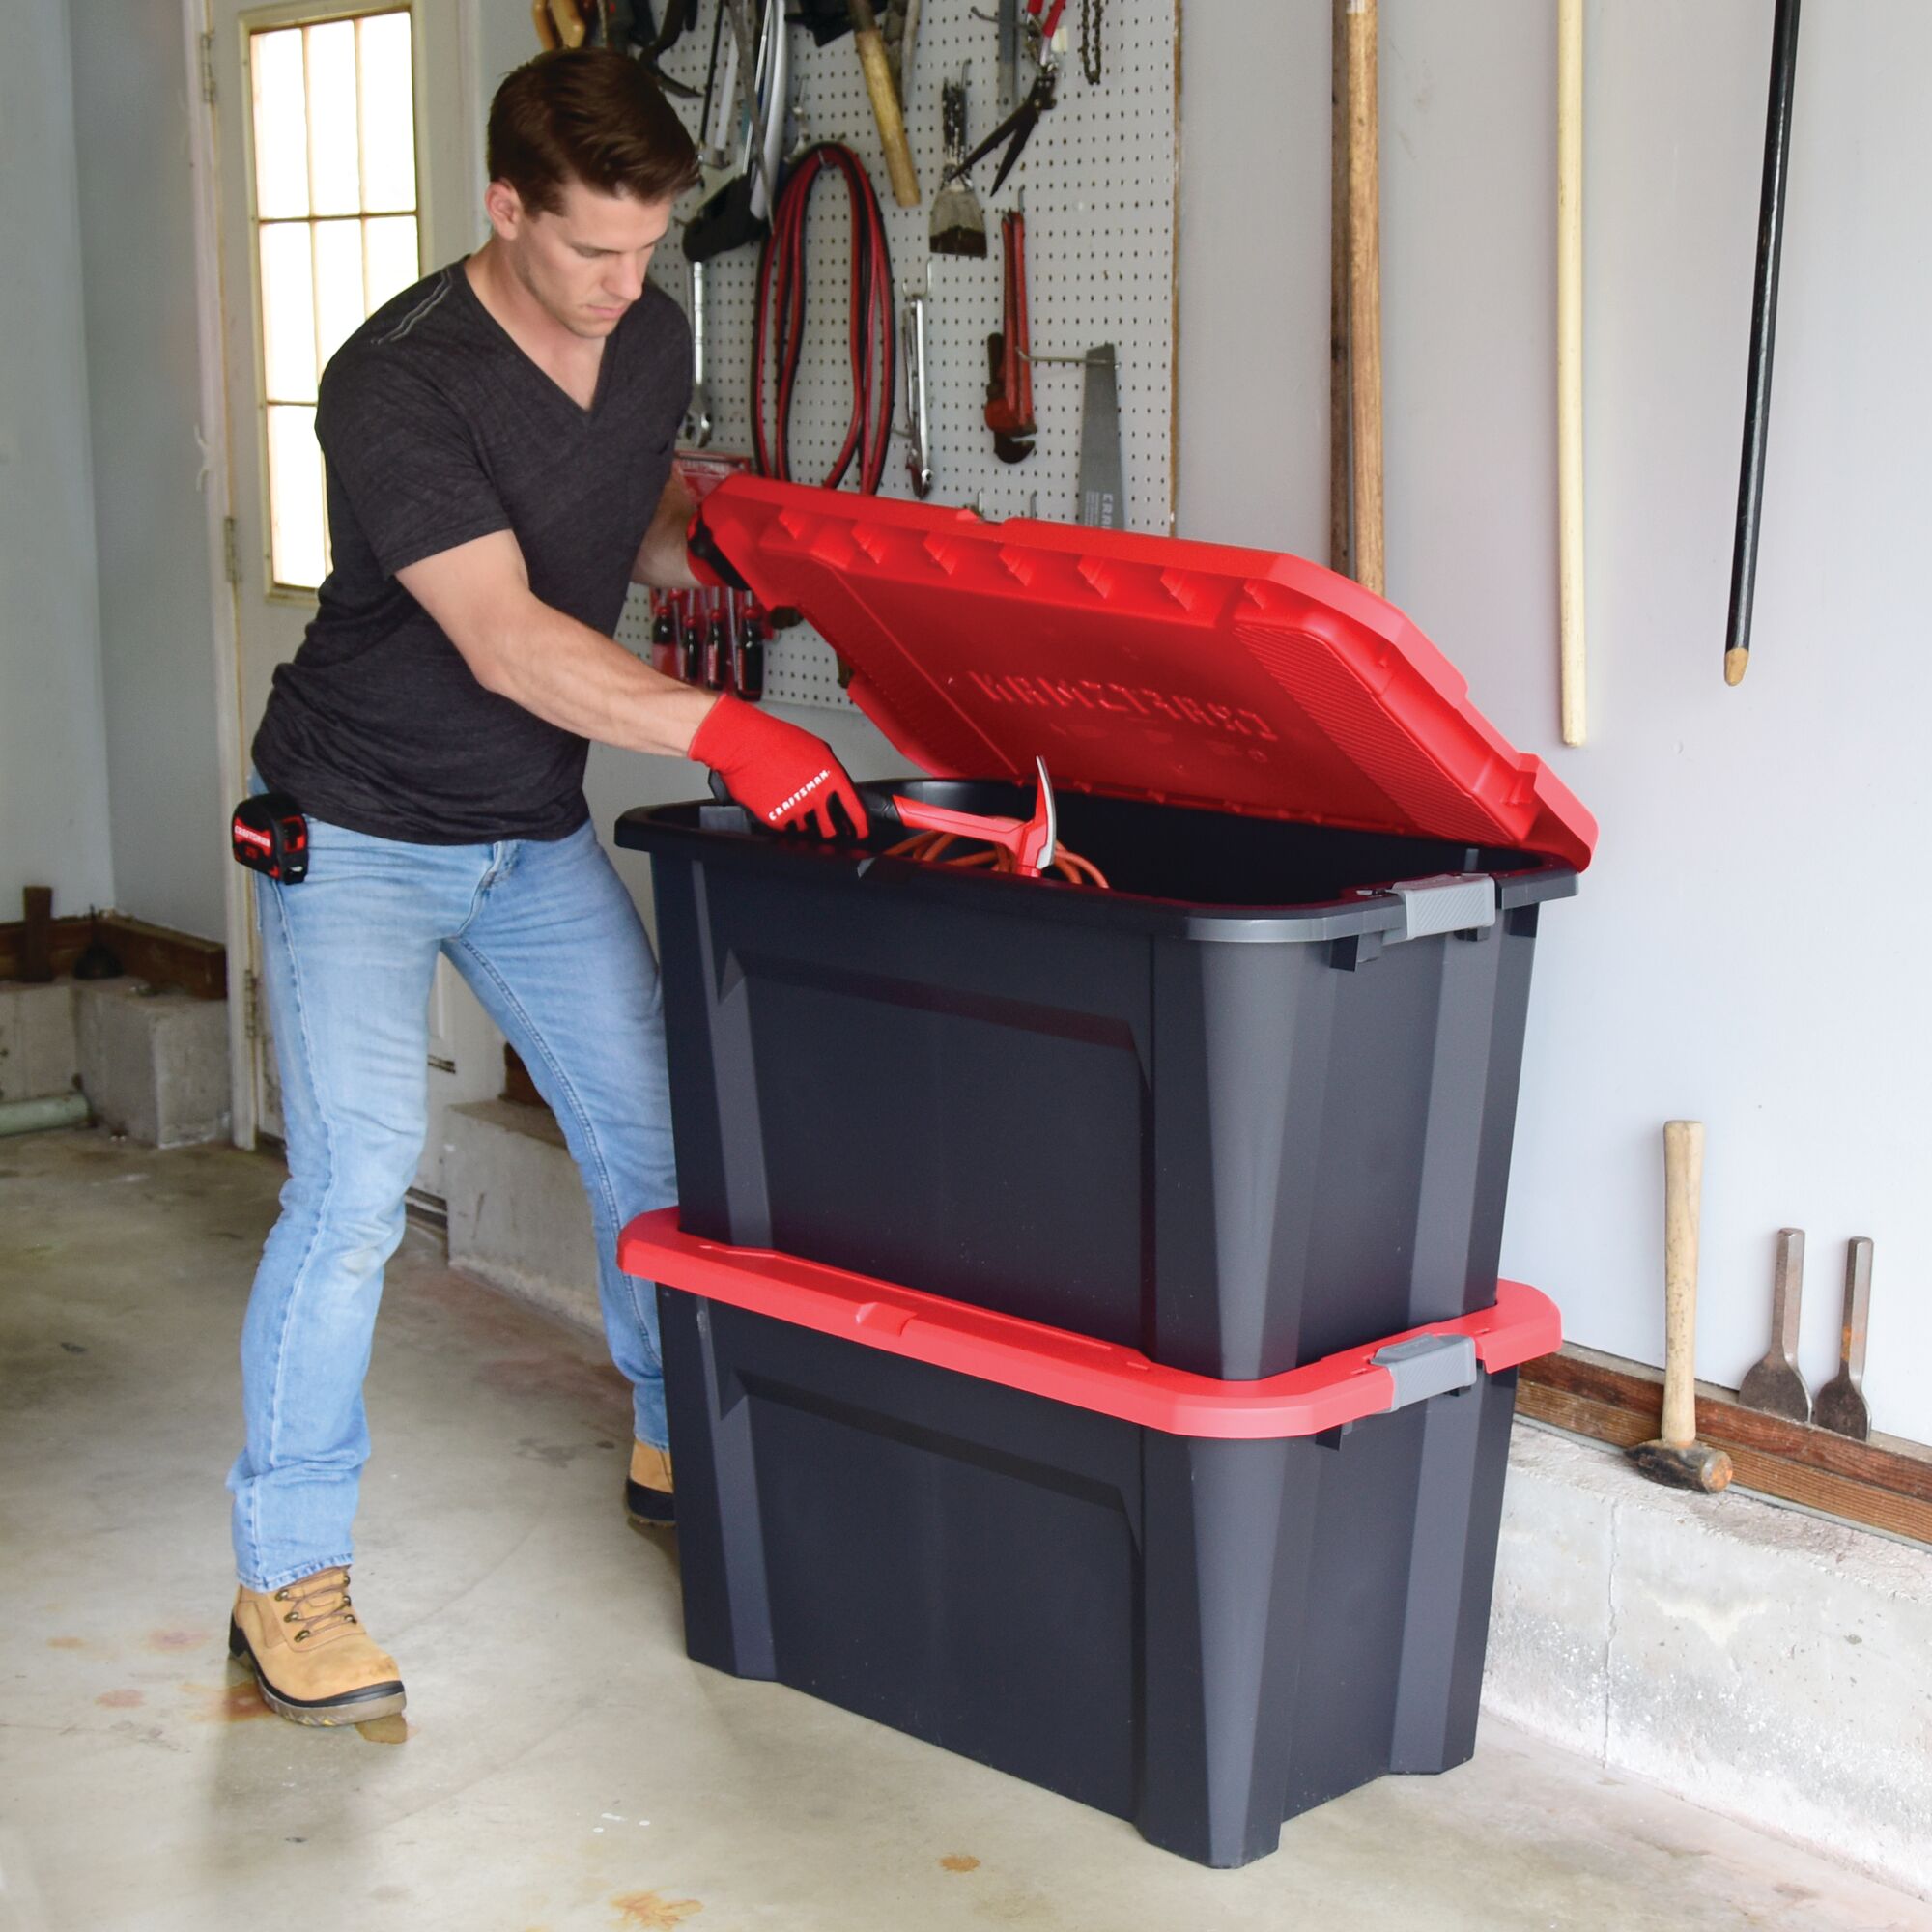 40 Gallon latching tote being used by a person to store tools.